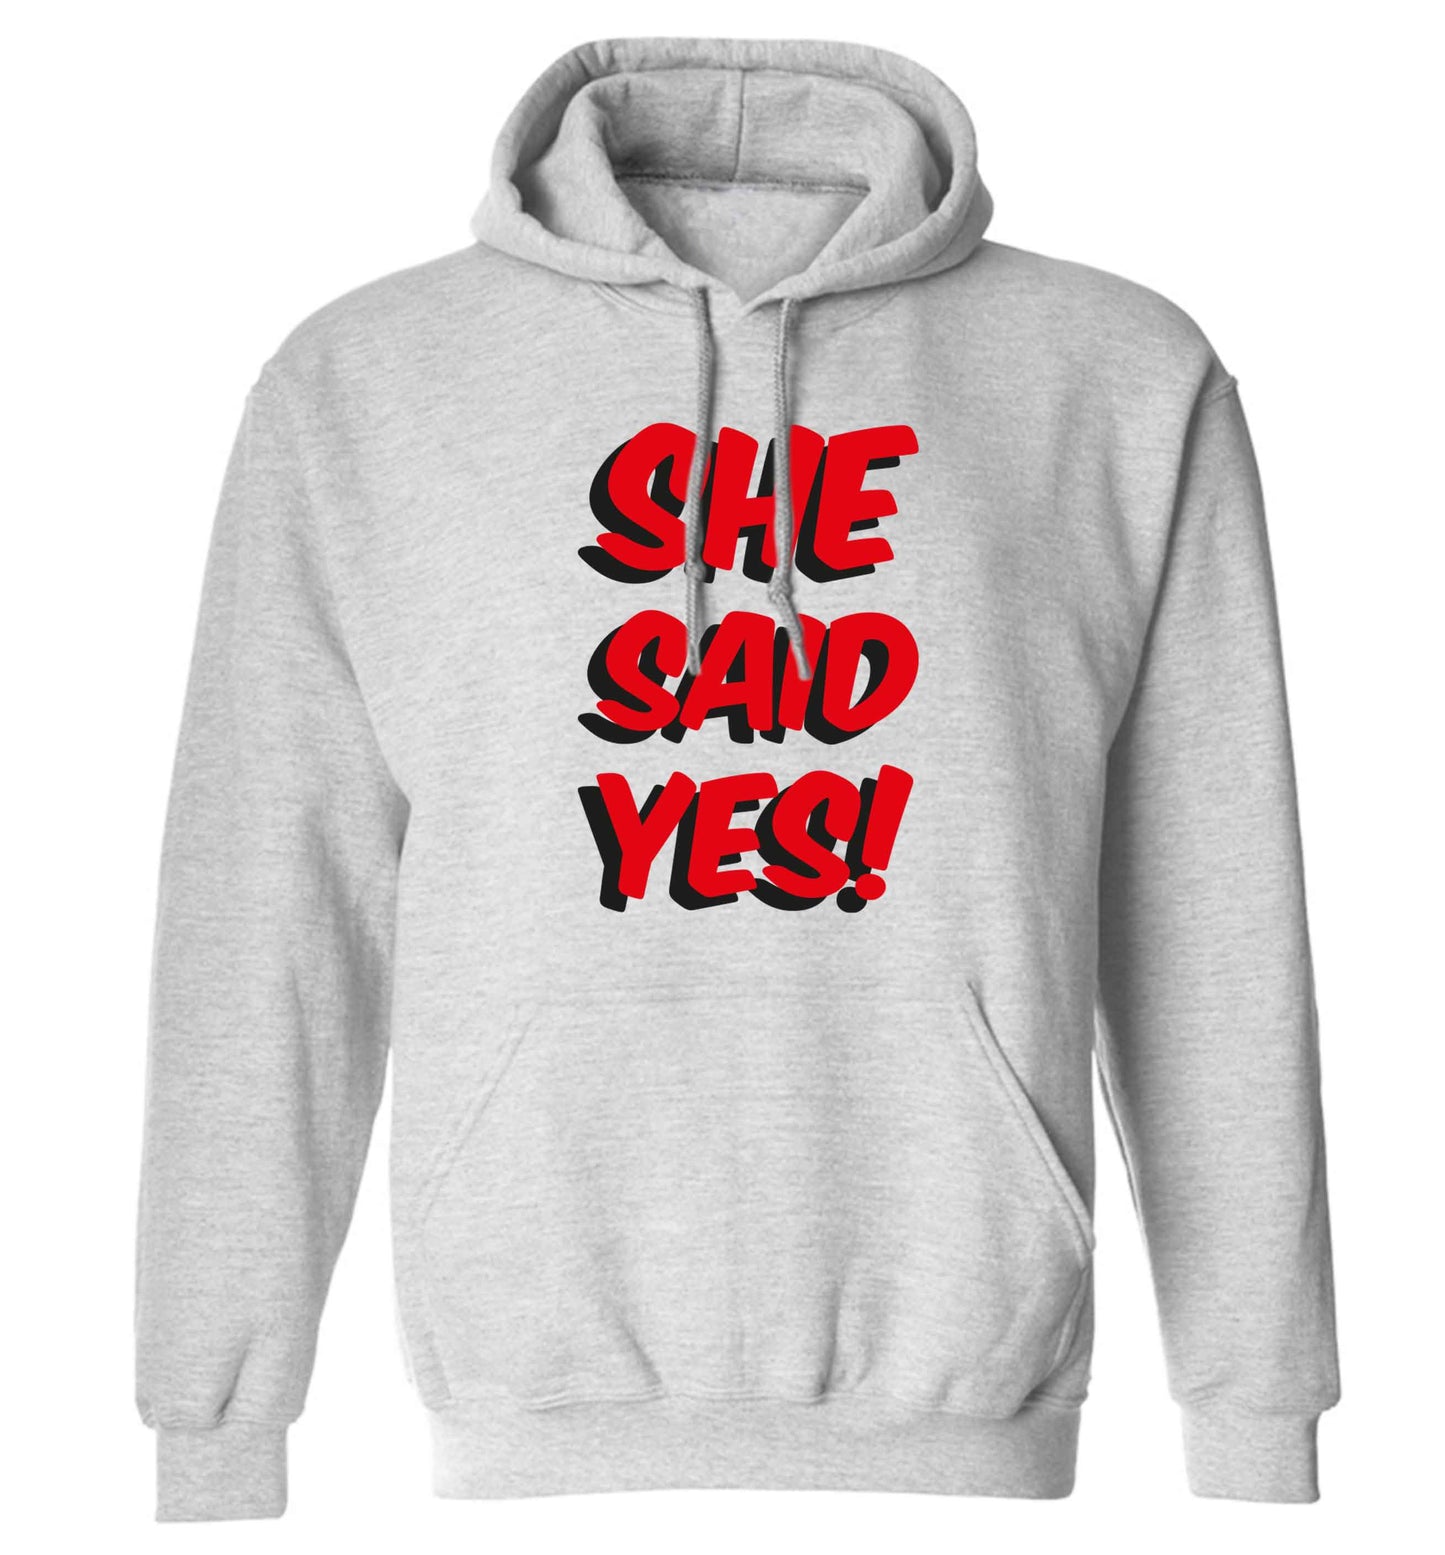 She said yes adults unisex grey hoodie 2XL